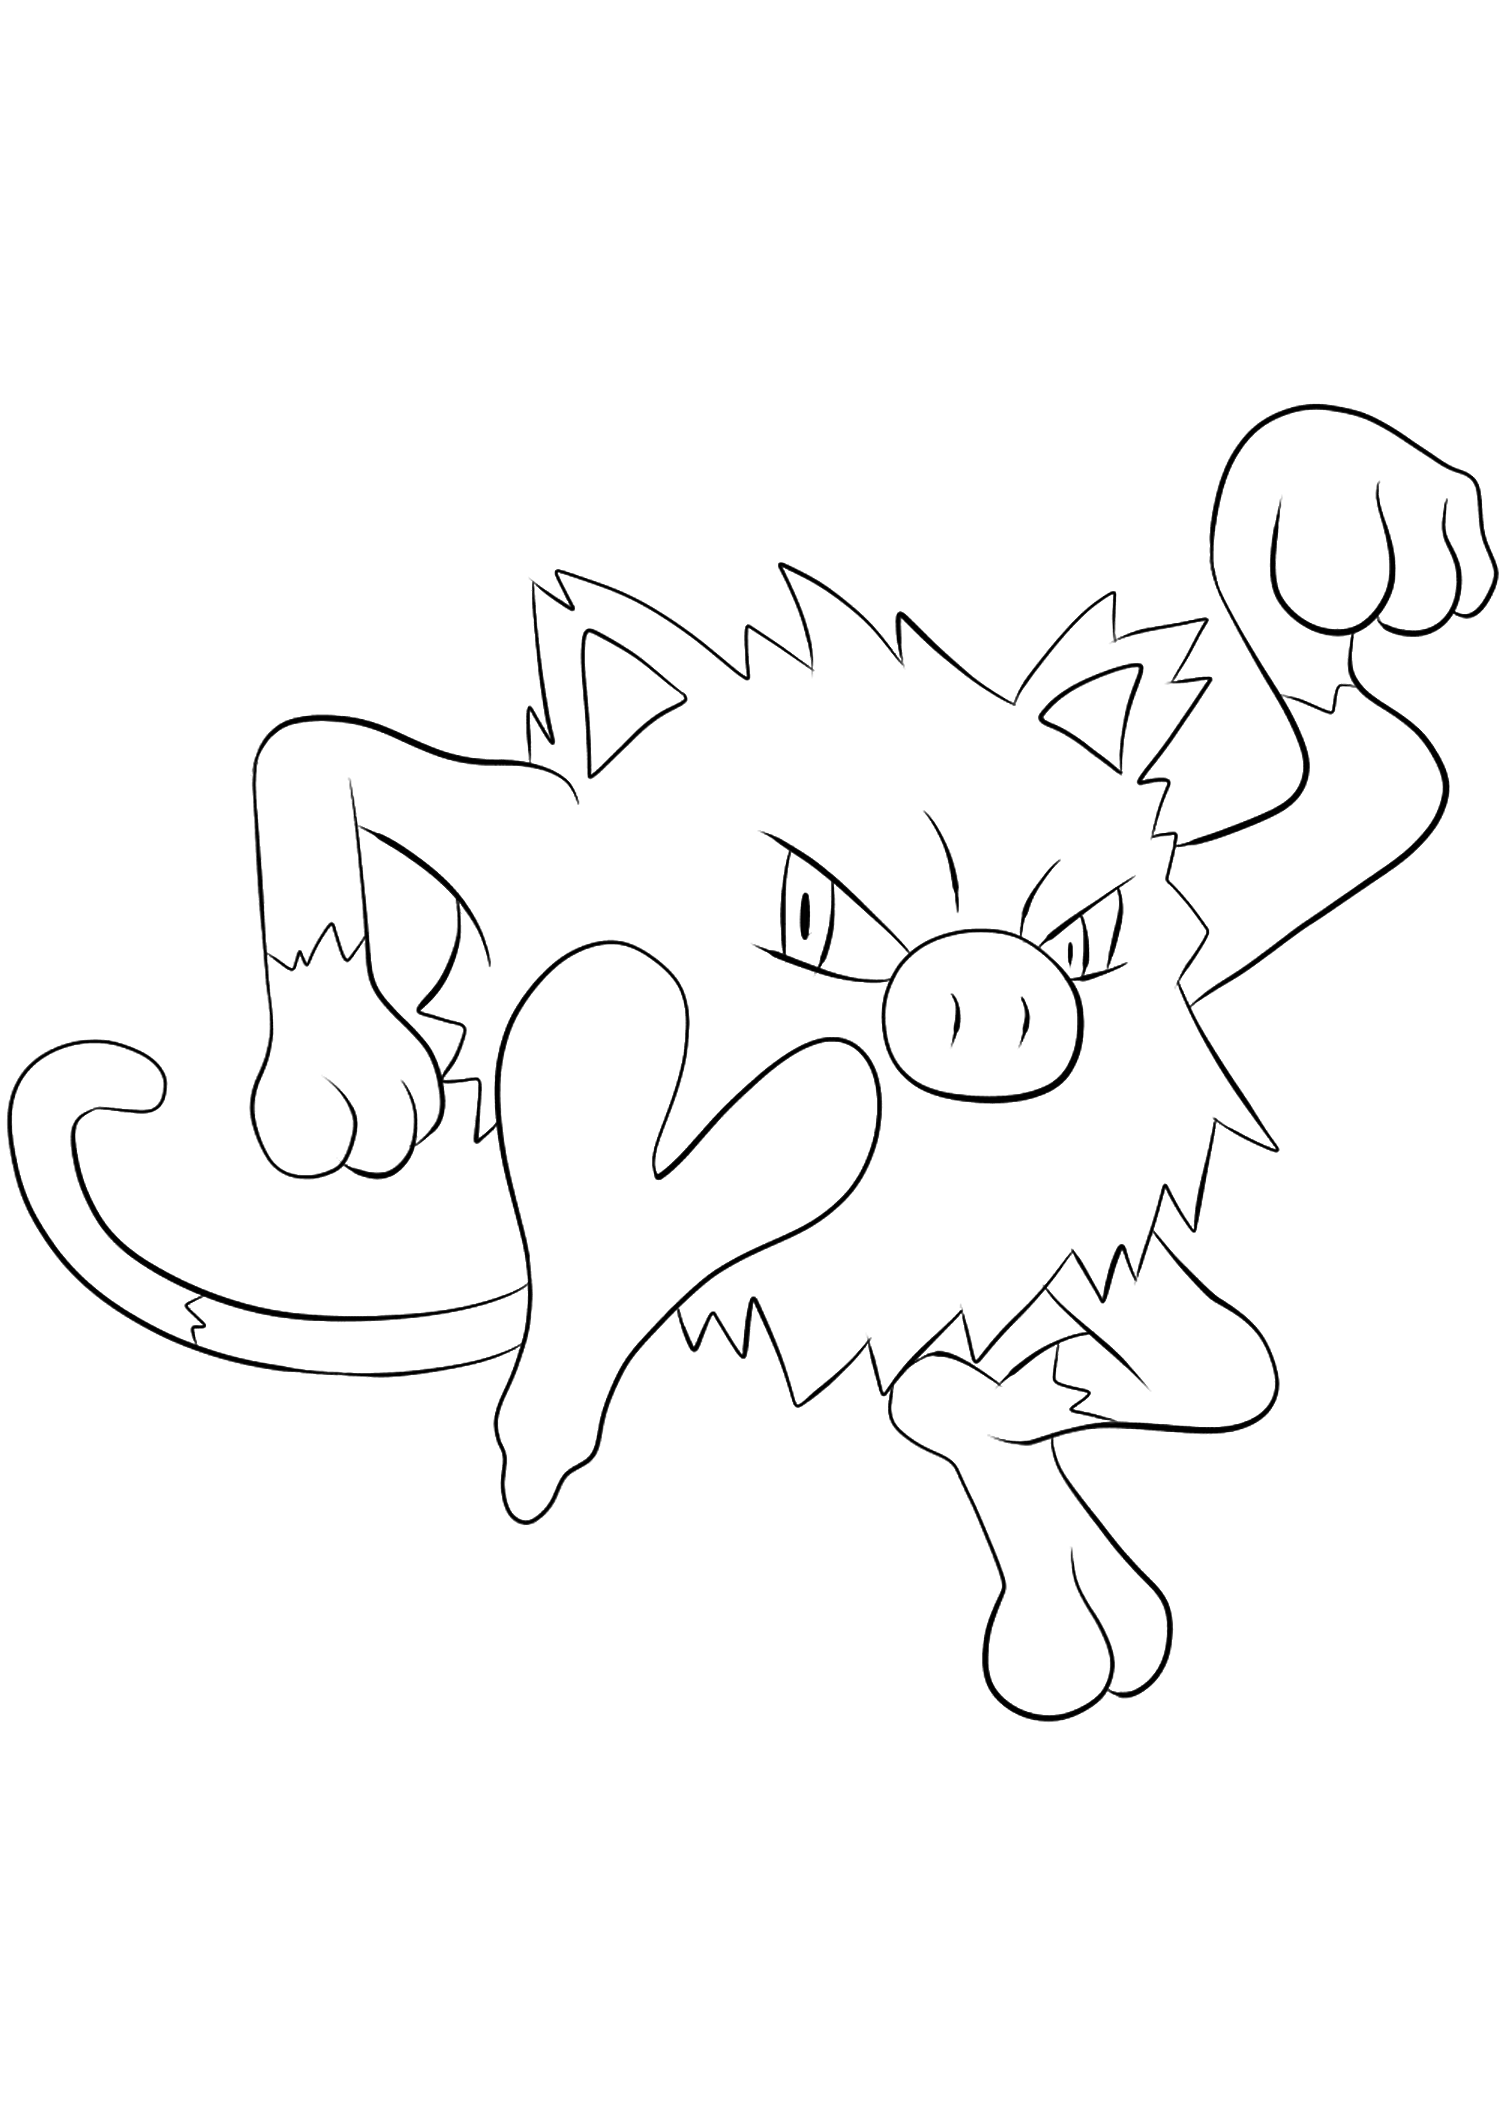 Mankey No 56 Pokemon Generation I All Pokemon Coloring Pages Kids Coloring Pages